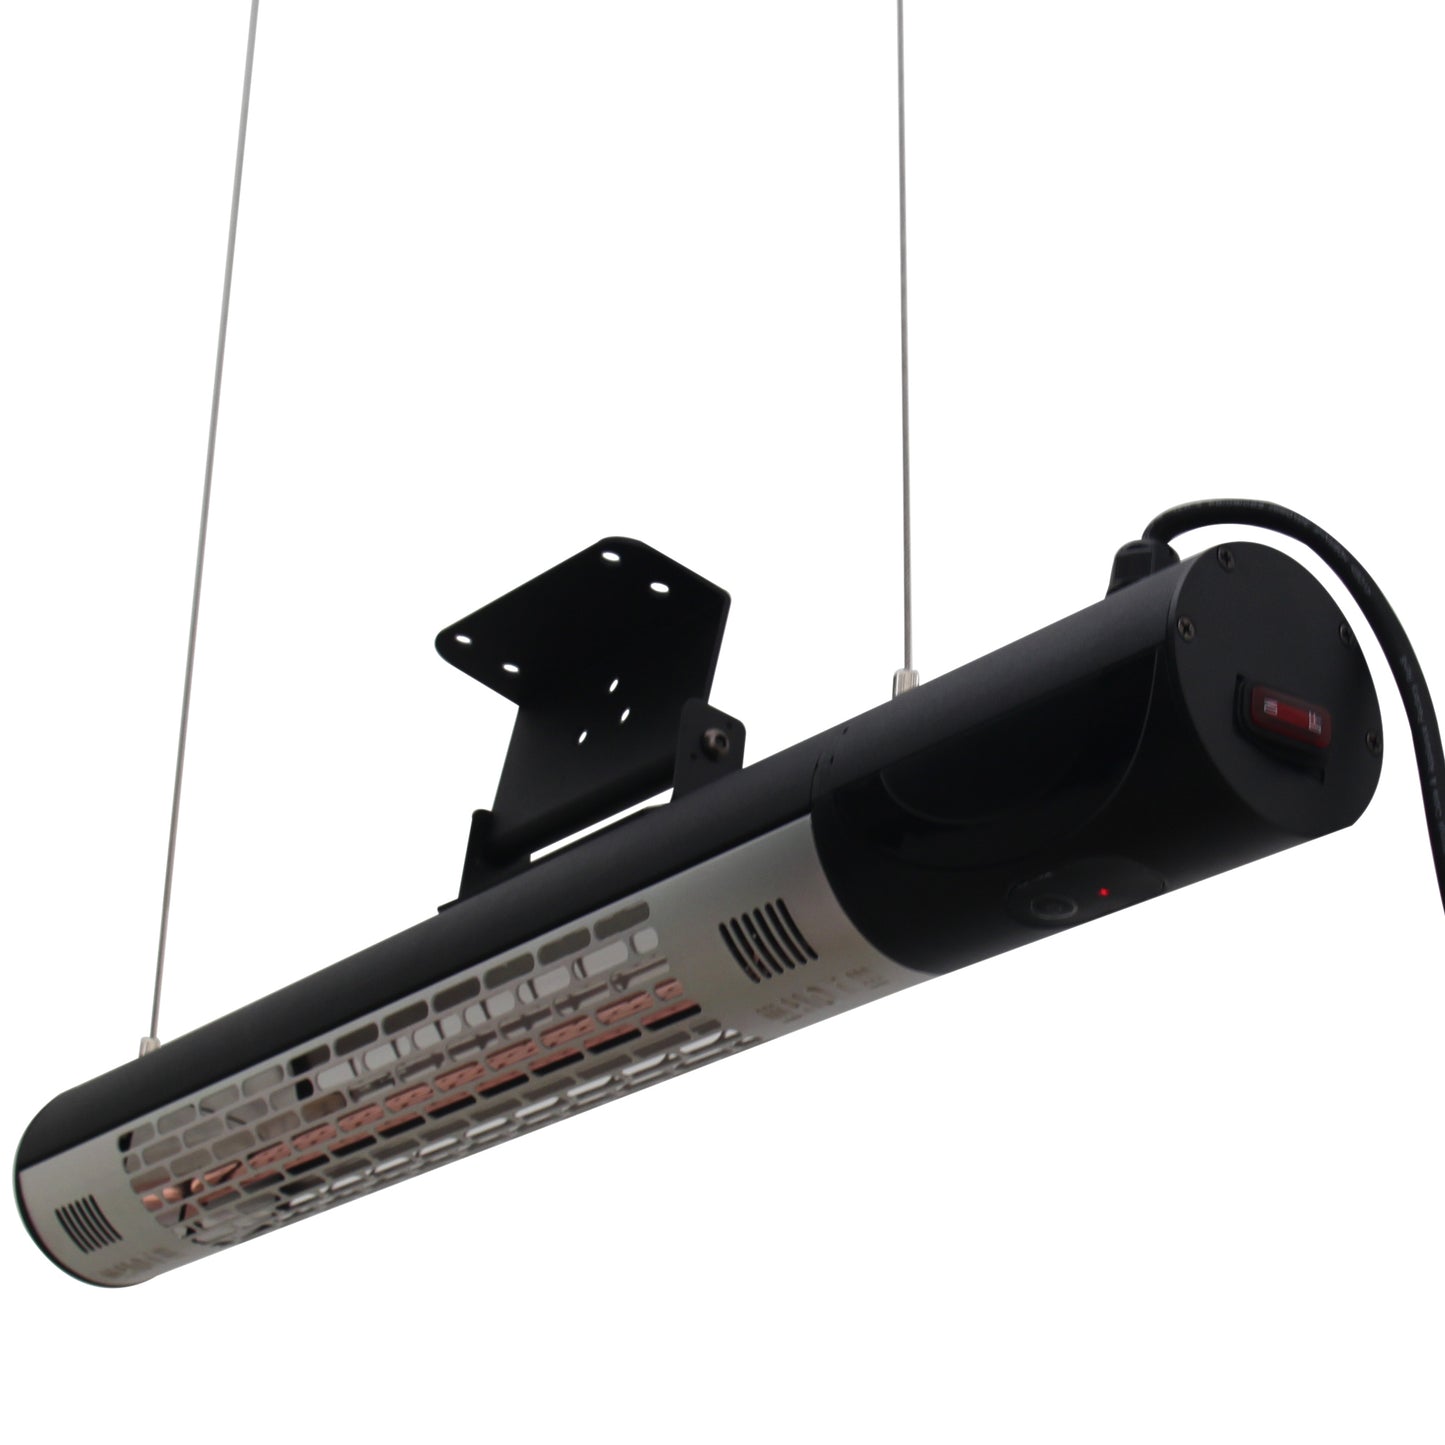 Outsunny Outdoor Wall Mount Electric Halogen Heater, 1500W-Black